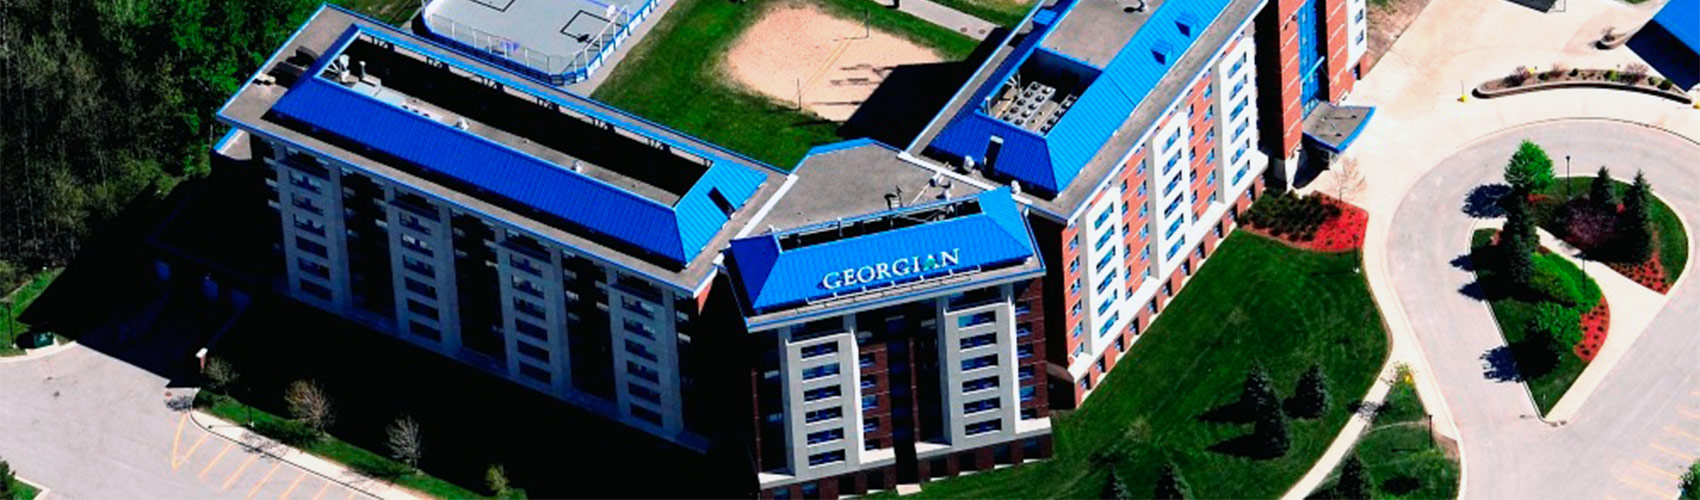 Student Life Residence And Housing Options Barrie Residence Georgian College 2013 05 16 